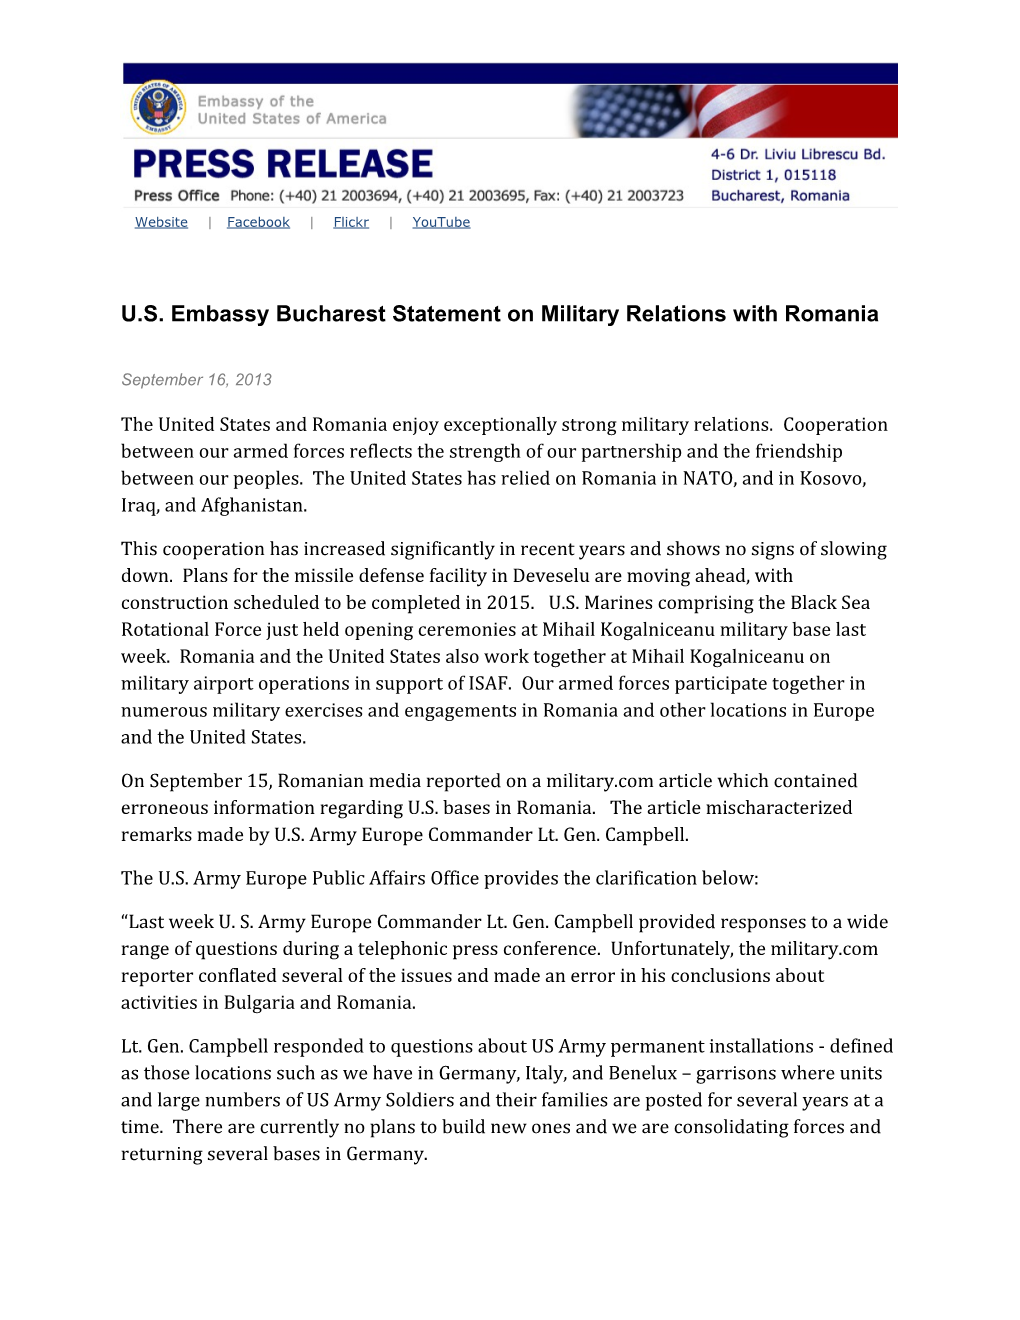 U.S. Embassy Bucharest Statement on Military Relations with Romania